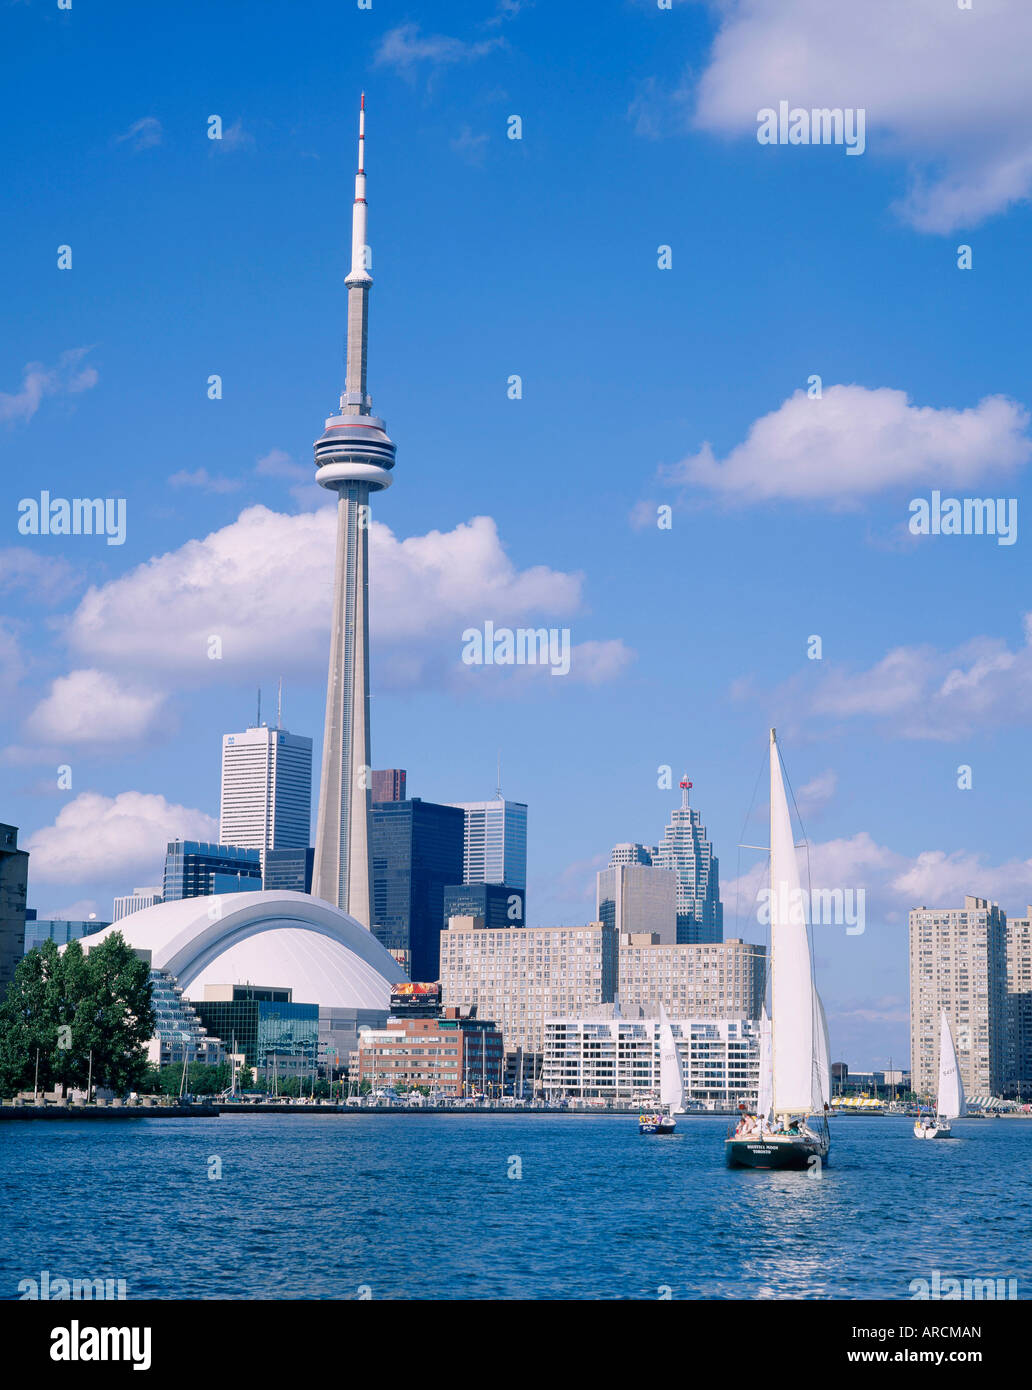 The C.N.Tower and the Toronto skyline, Ontario, Canada Stock Photo